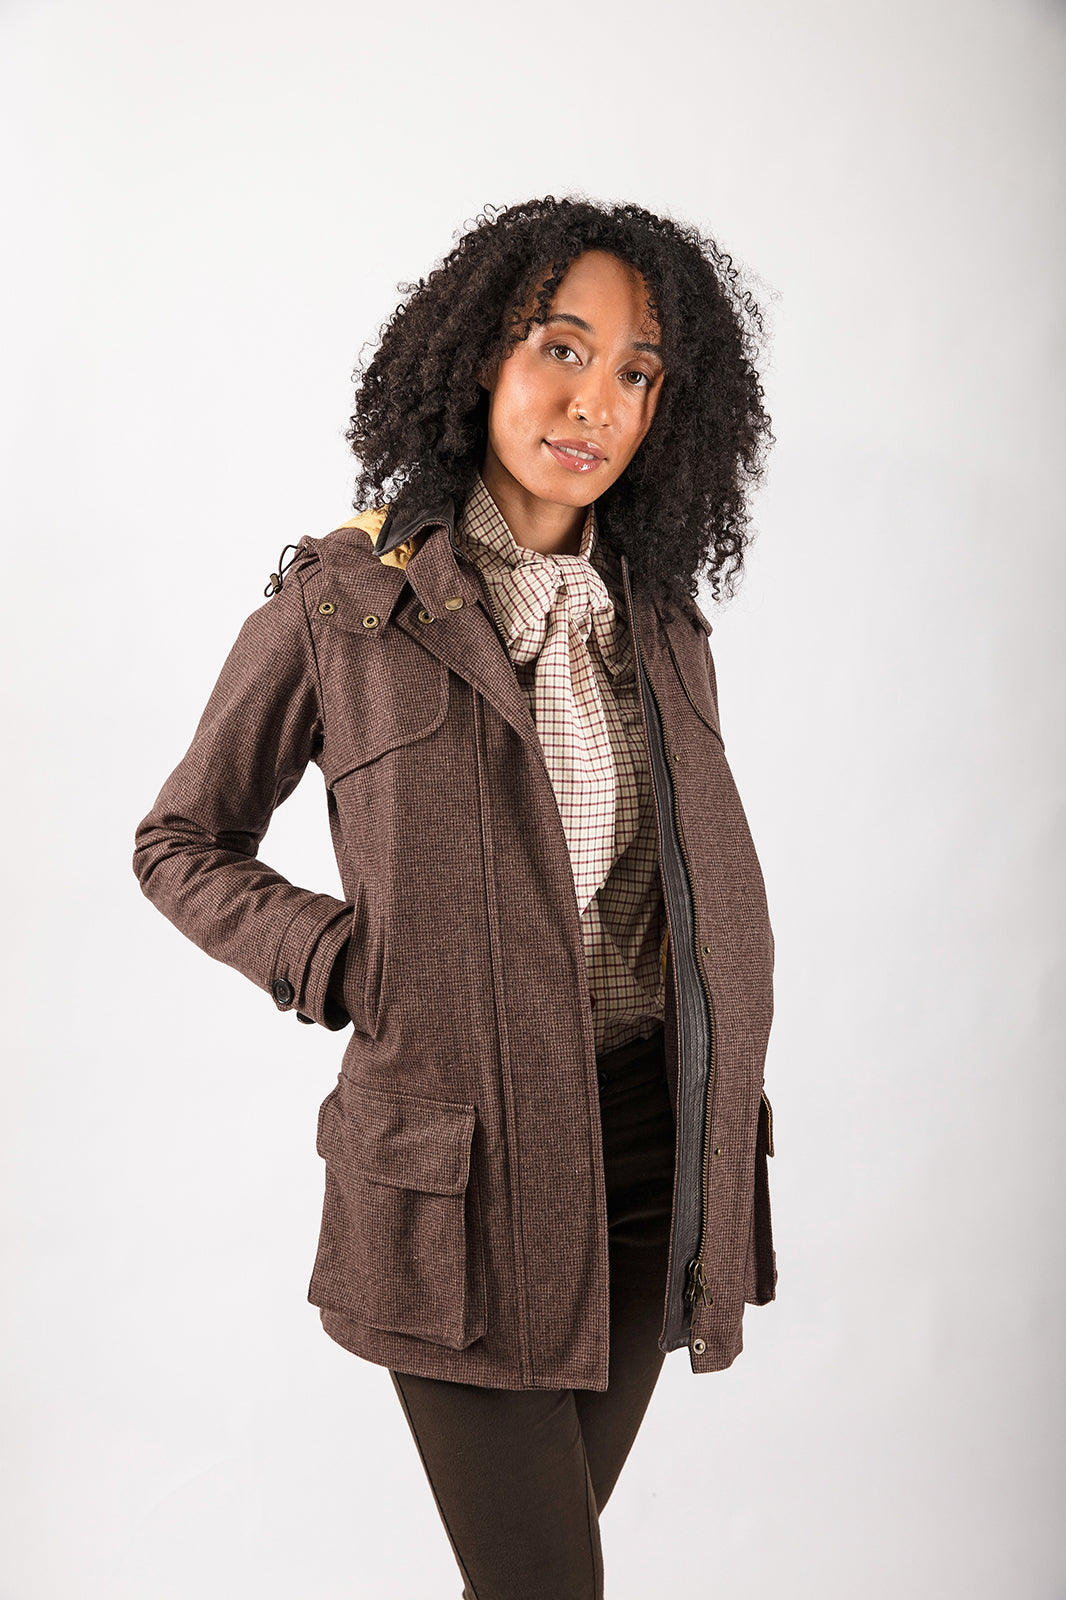 Ladies Tweed Jackets and Coats  Women's Country Tweed Jackets and Coats